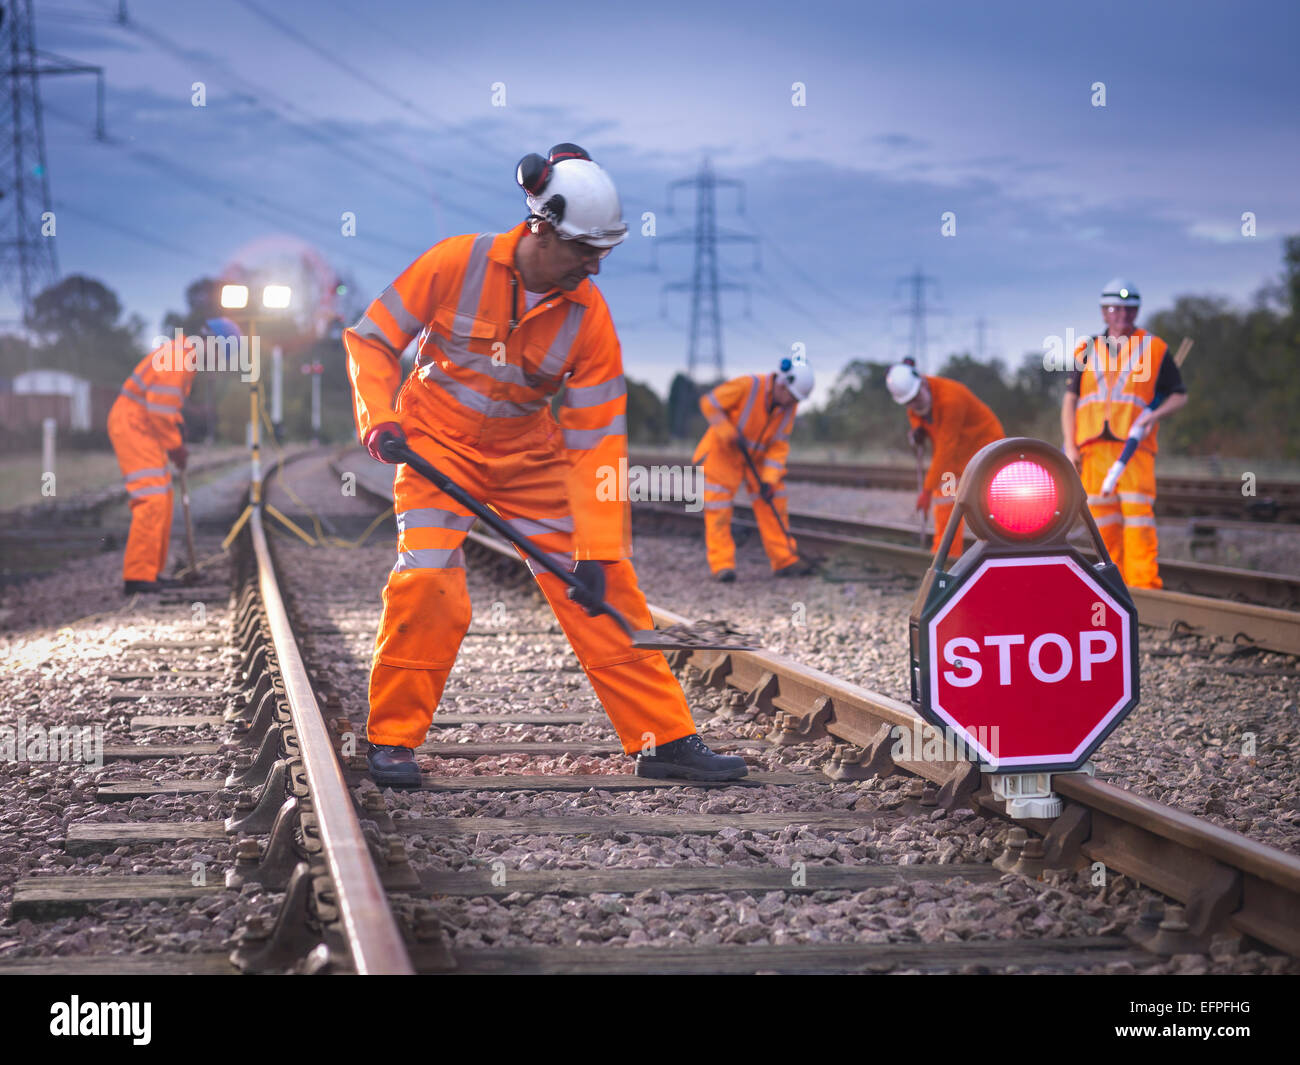 Railway maintenance workers on track with stop sign at night Stock Photo